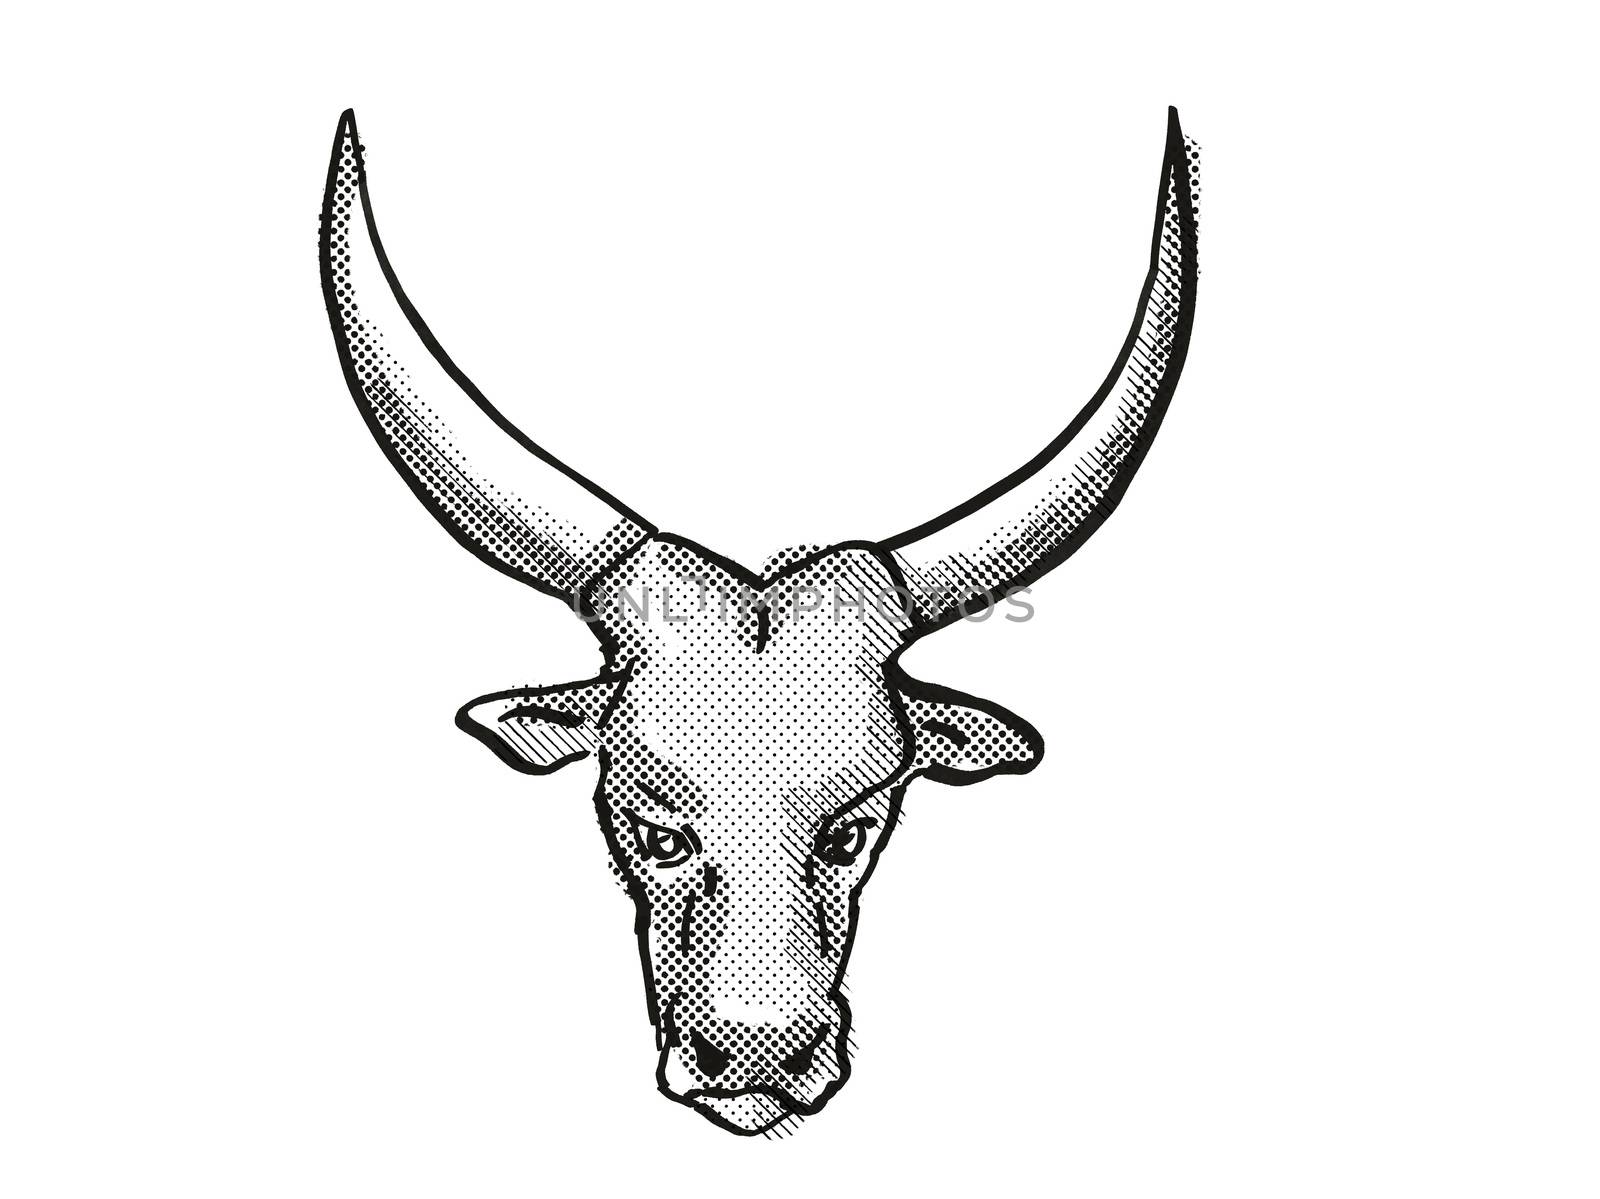 Retro cartoon style drawing of head of an Aure et Saint-Girons or Casta  bull or cow, a cattle breed viewed from front  on isolated white background done in black and white